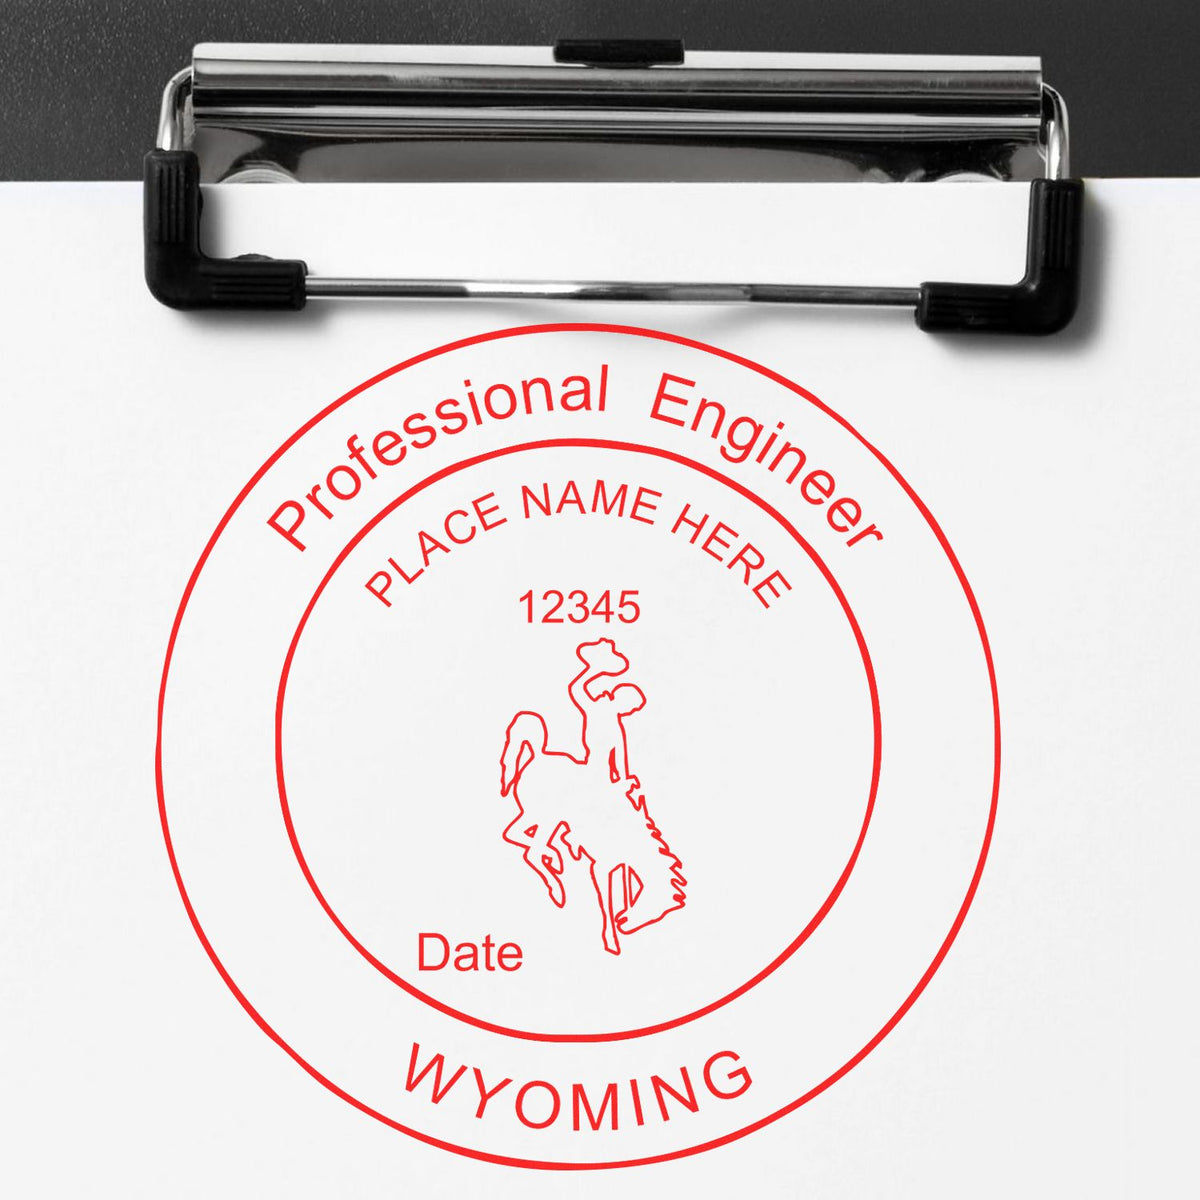 A photograph of the Premium MaxLight Pre-Inked Wyoming Engineering Stamp stamp impression reveals a vivid, professional image of the on paper.